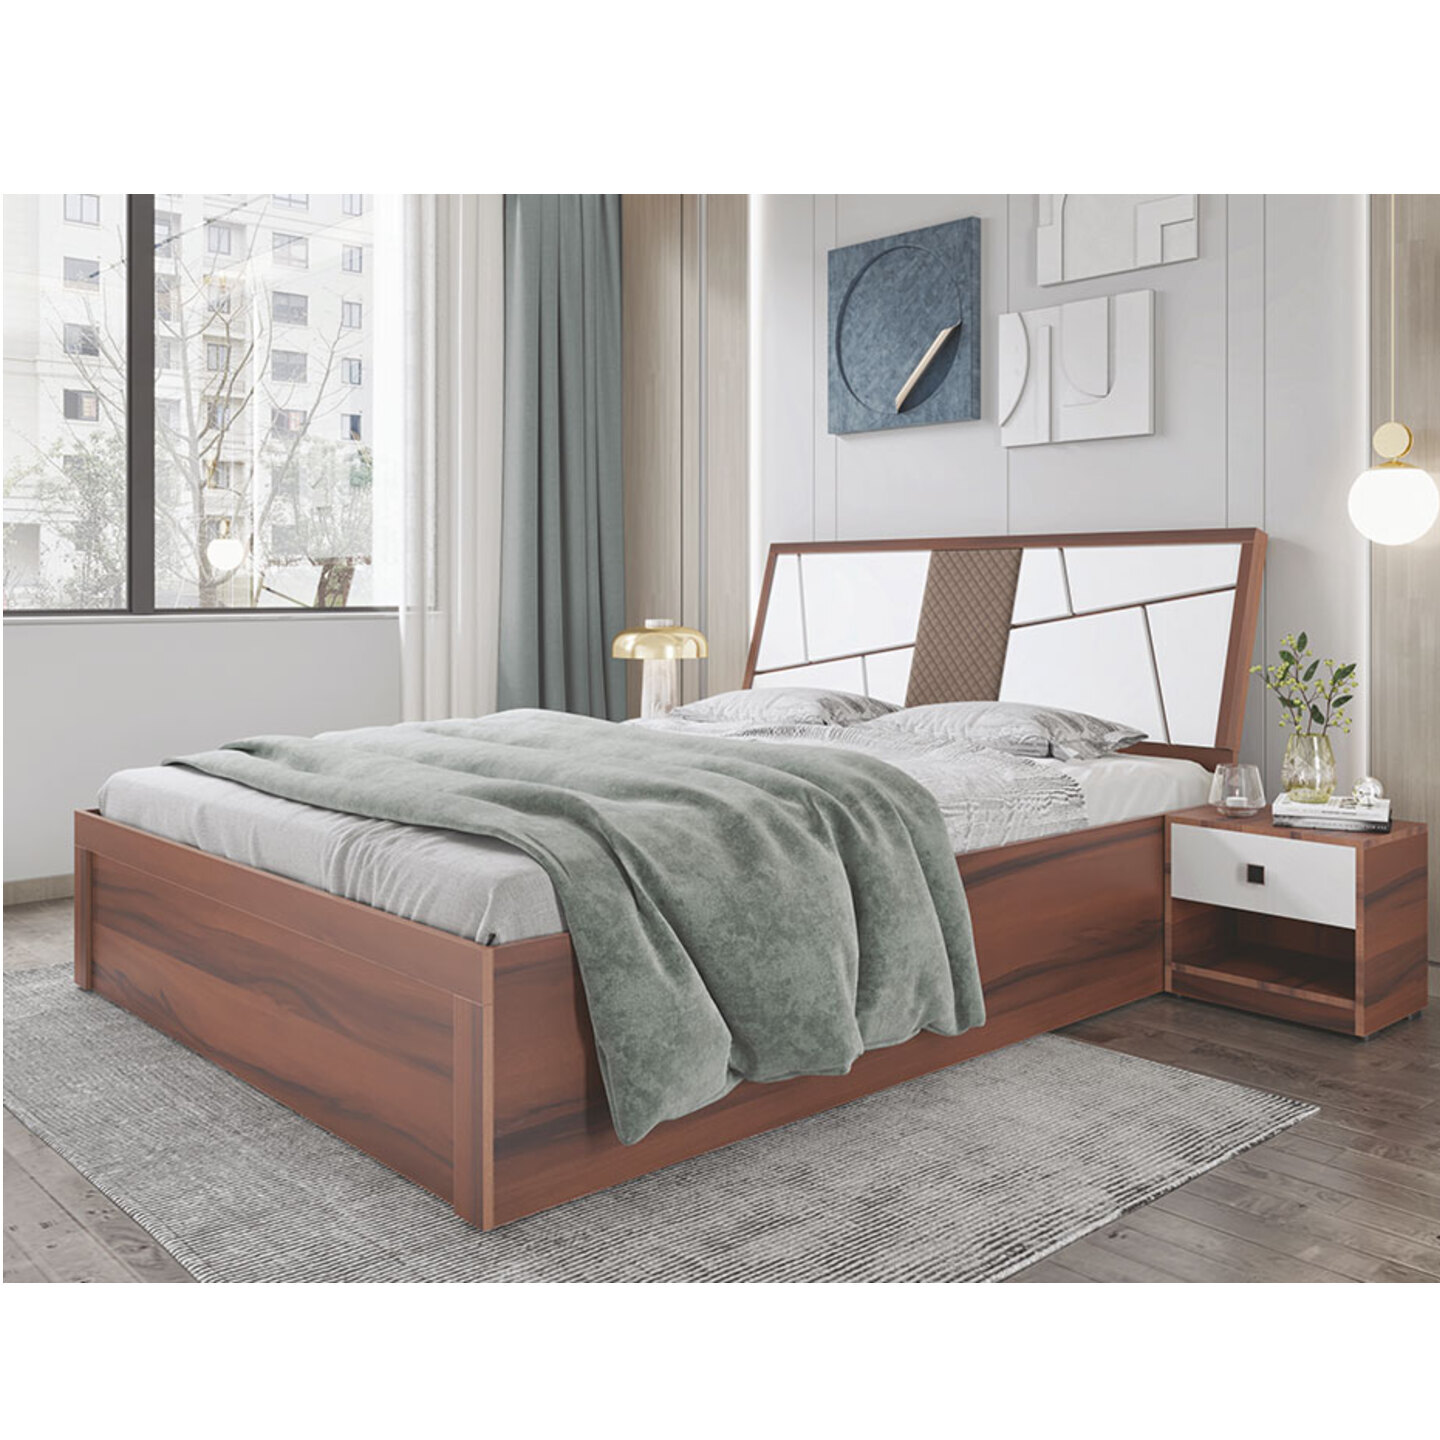 RLF Queen Size Bed 78"x60" Prime In Brown Colour